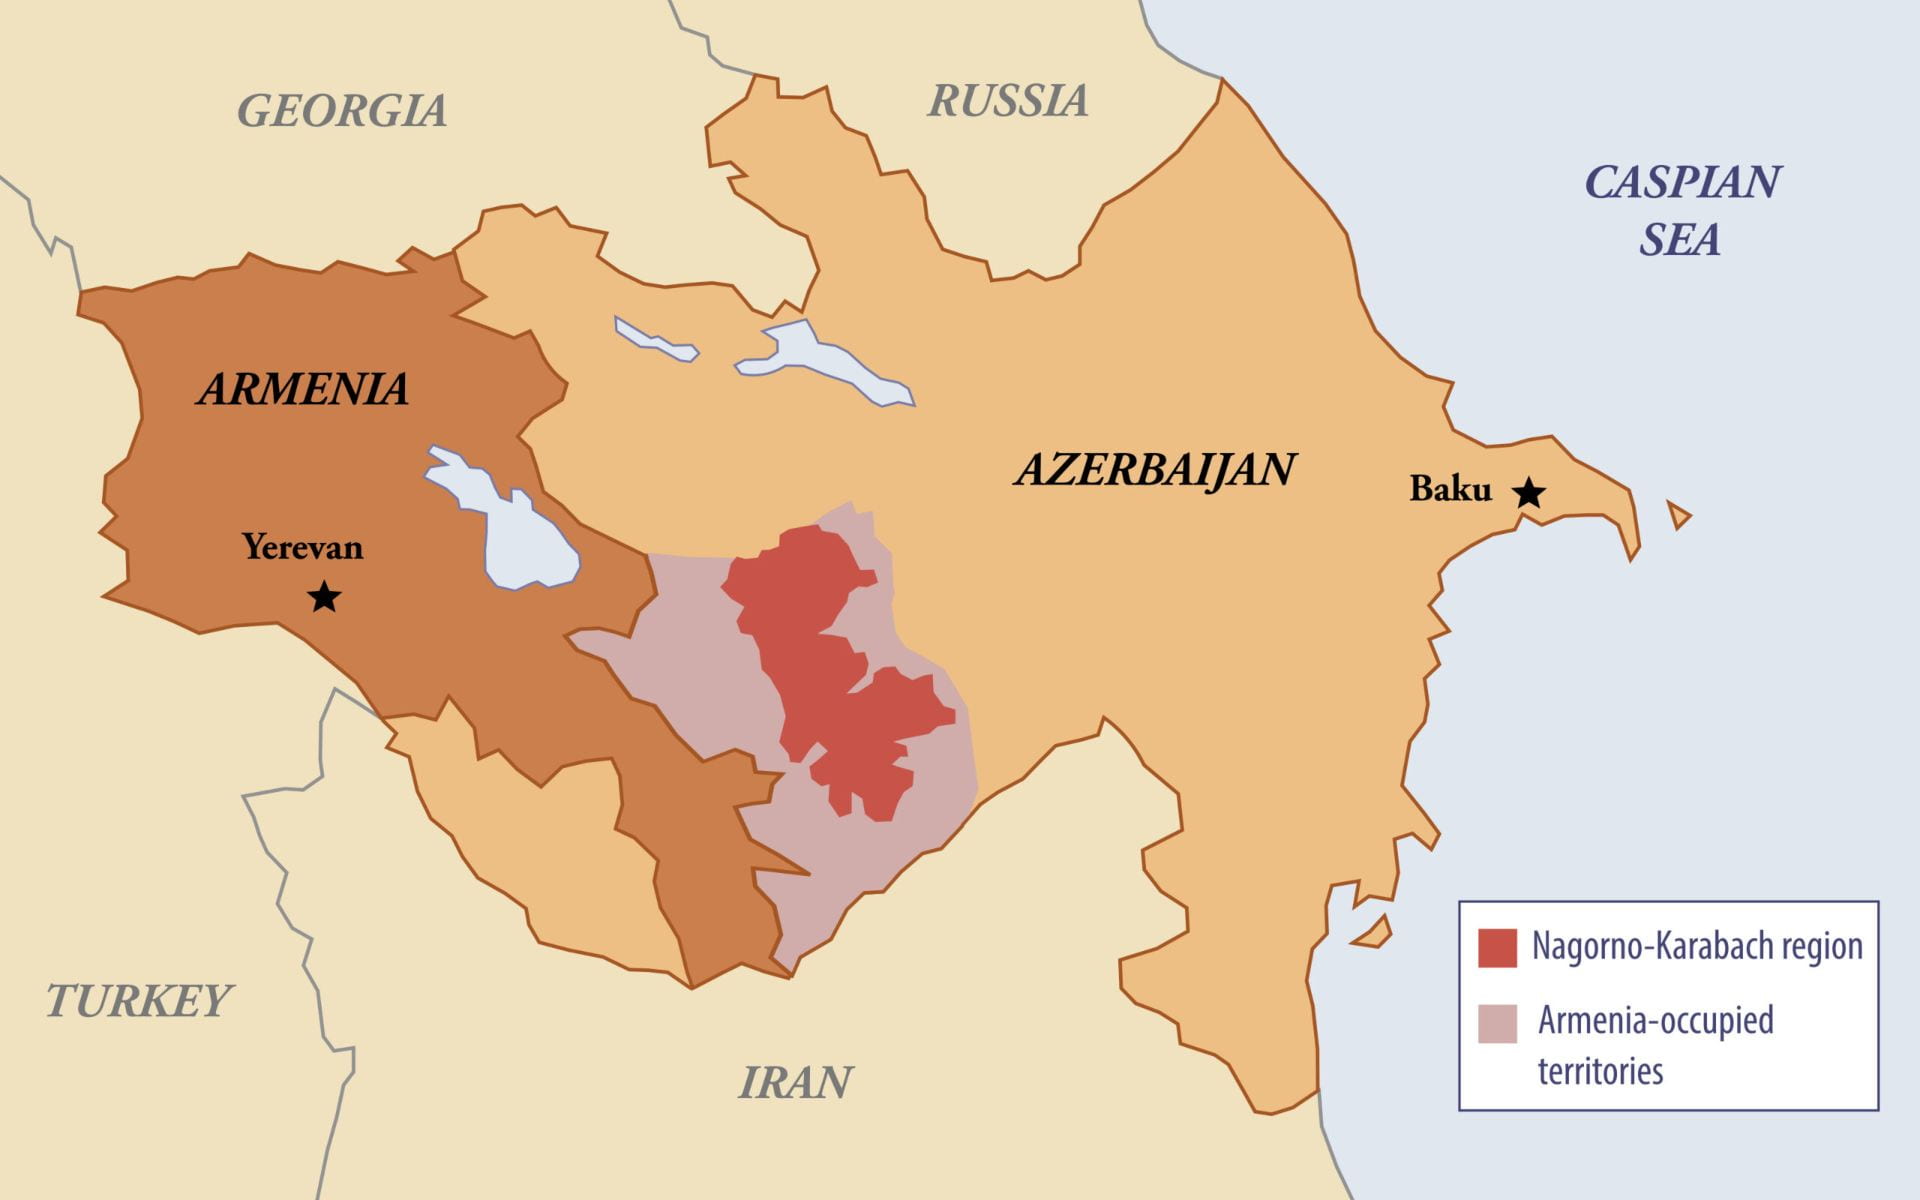 This image depicts a map of the involved countries/regions. Armenia on the left-most side, Azerbaijan on the right-most side, and the Nagorno-Karabakh region in the middle, highlighted in bright red.